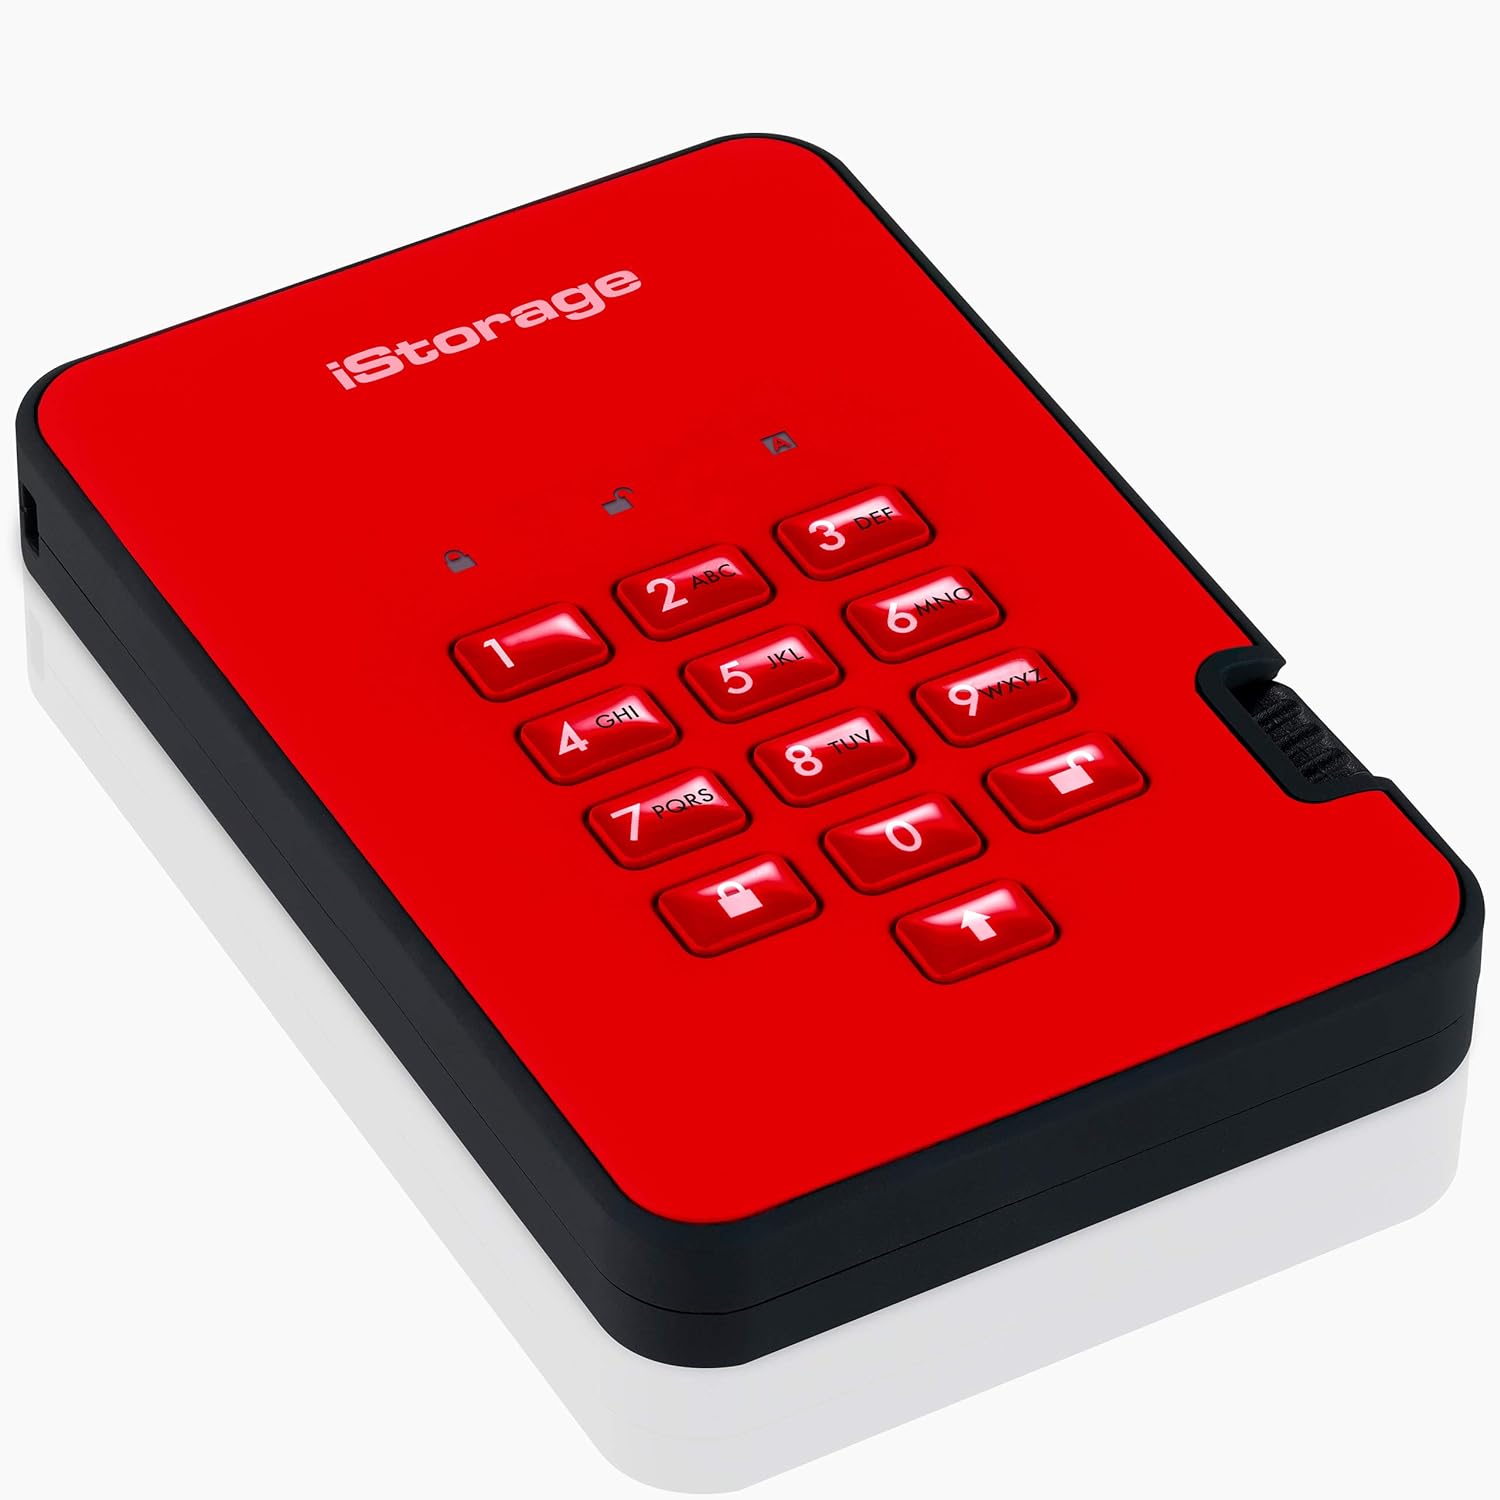 iStorage diskAshur2 HDD 2TB Red - Secure portable hard drive - Password protected, dust and water resistant, portable, military grade hardware encryption USB 3.1 IS-DA2-256-2000-R